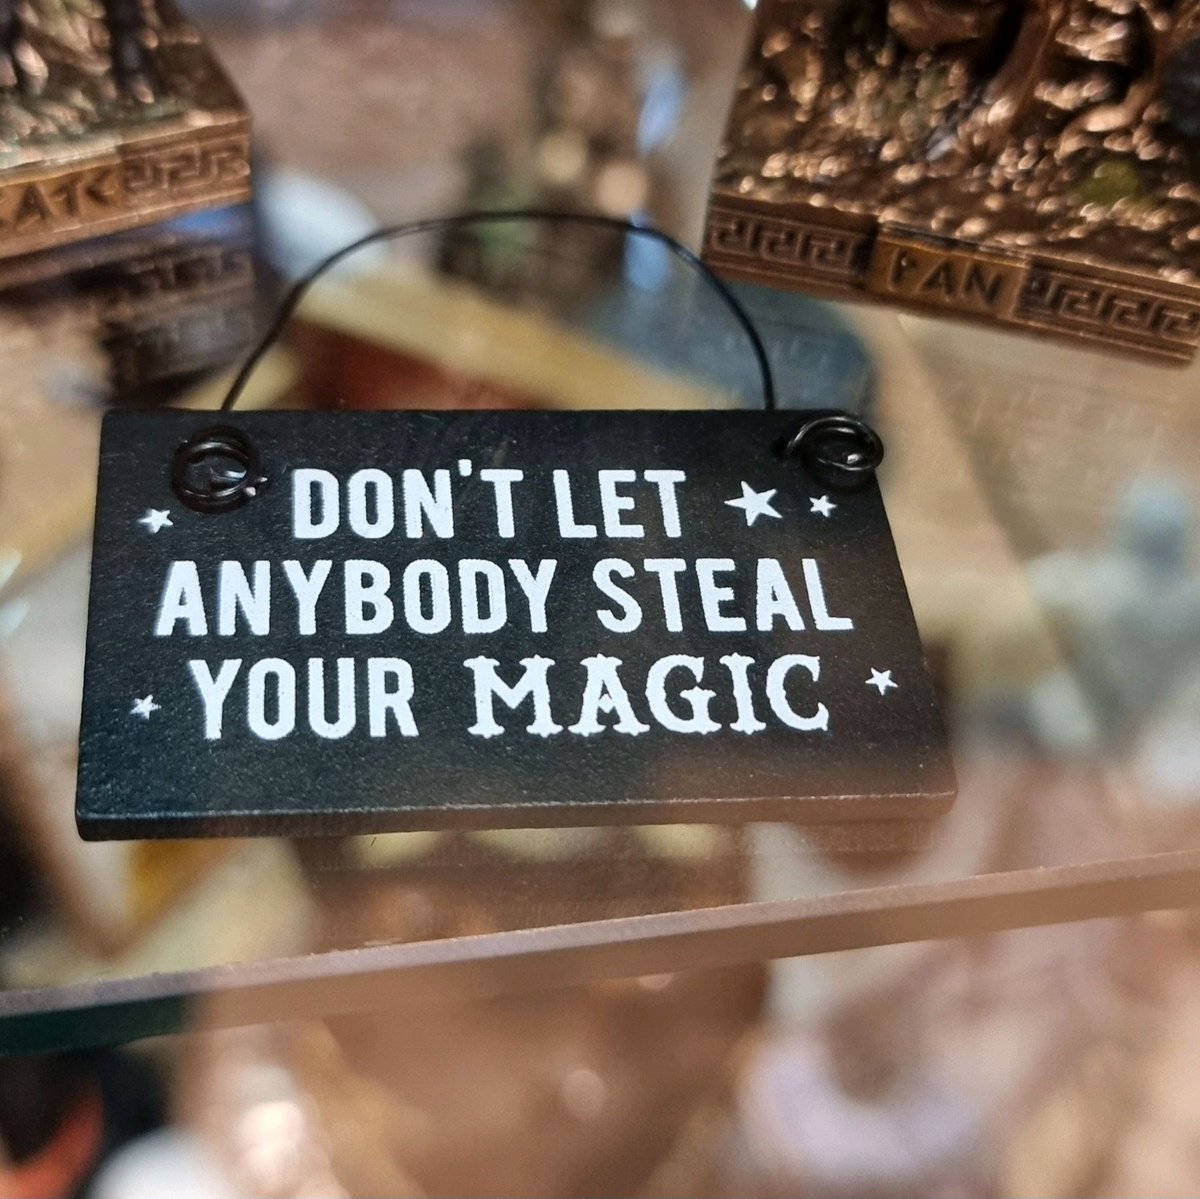 Don't let anyone steal your magic #inspirationalquotes #motivationalquotes #motivation #inspiration #quotes #quoteoftheday #love #quote #positivevibes #selflove #believe #happiness #lifestyle #mindset #loveyourself #goals #motivational #quotestoliveby #positivity